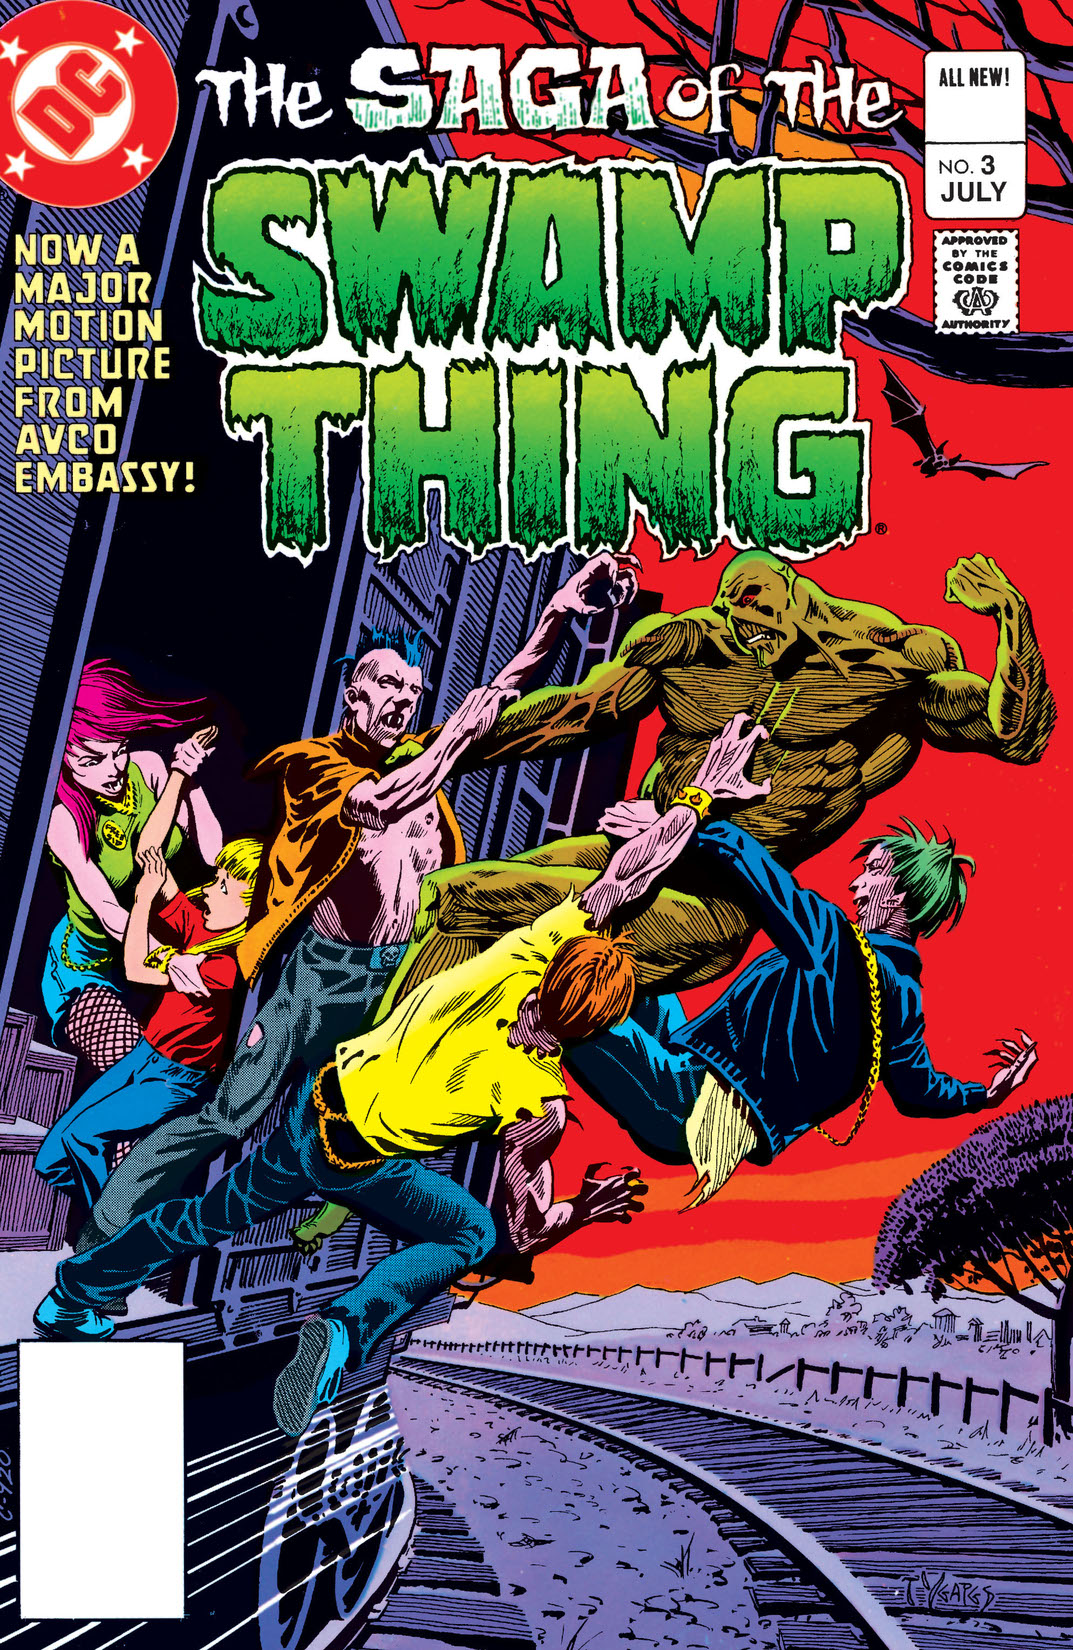 The Saga of the Swamp Thing (1982-) #3 preview images